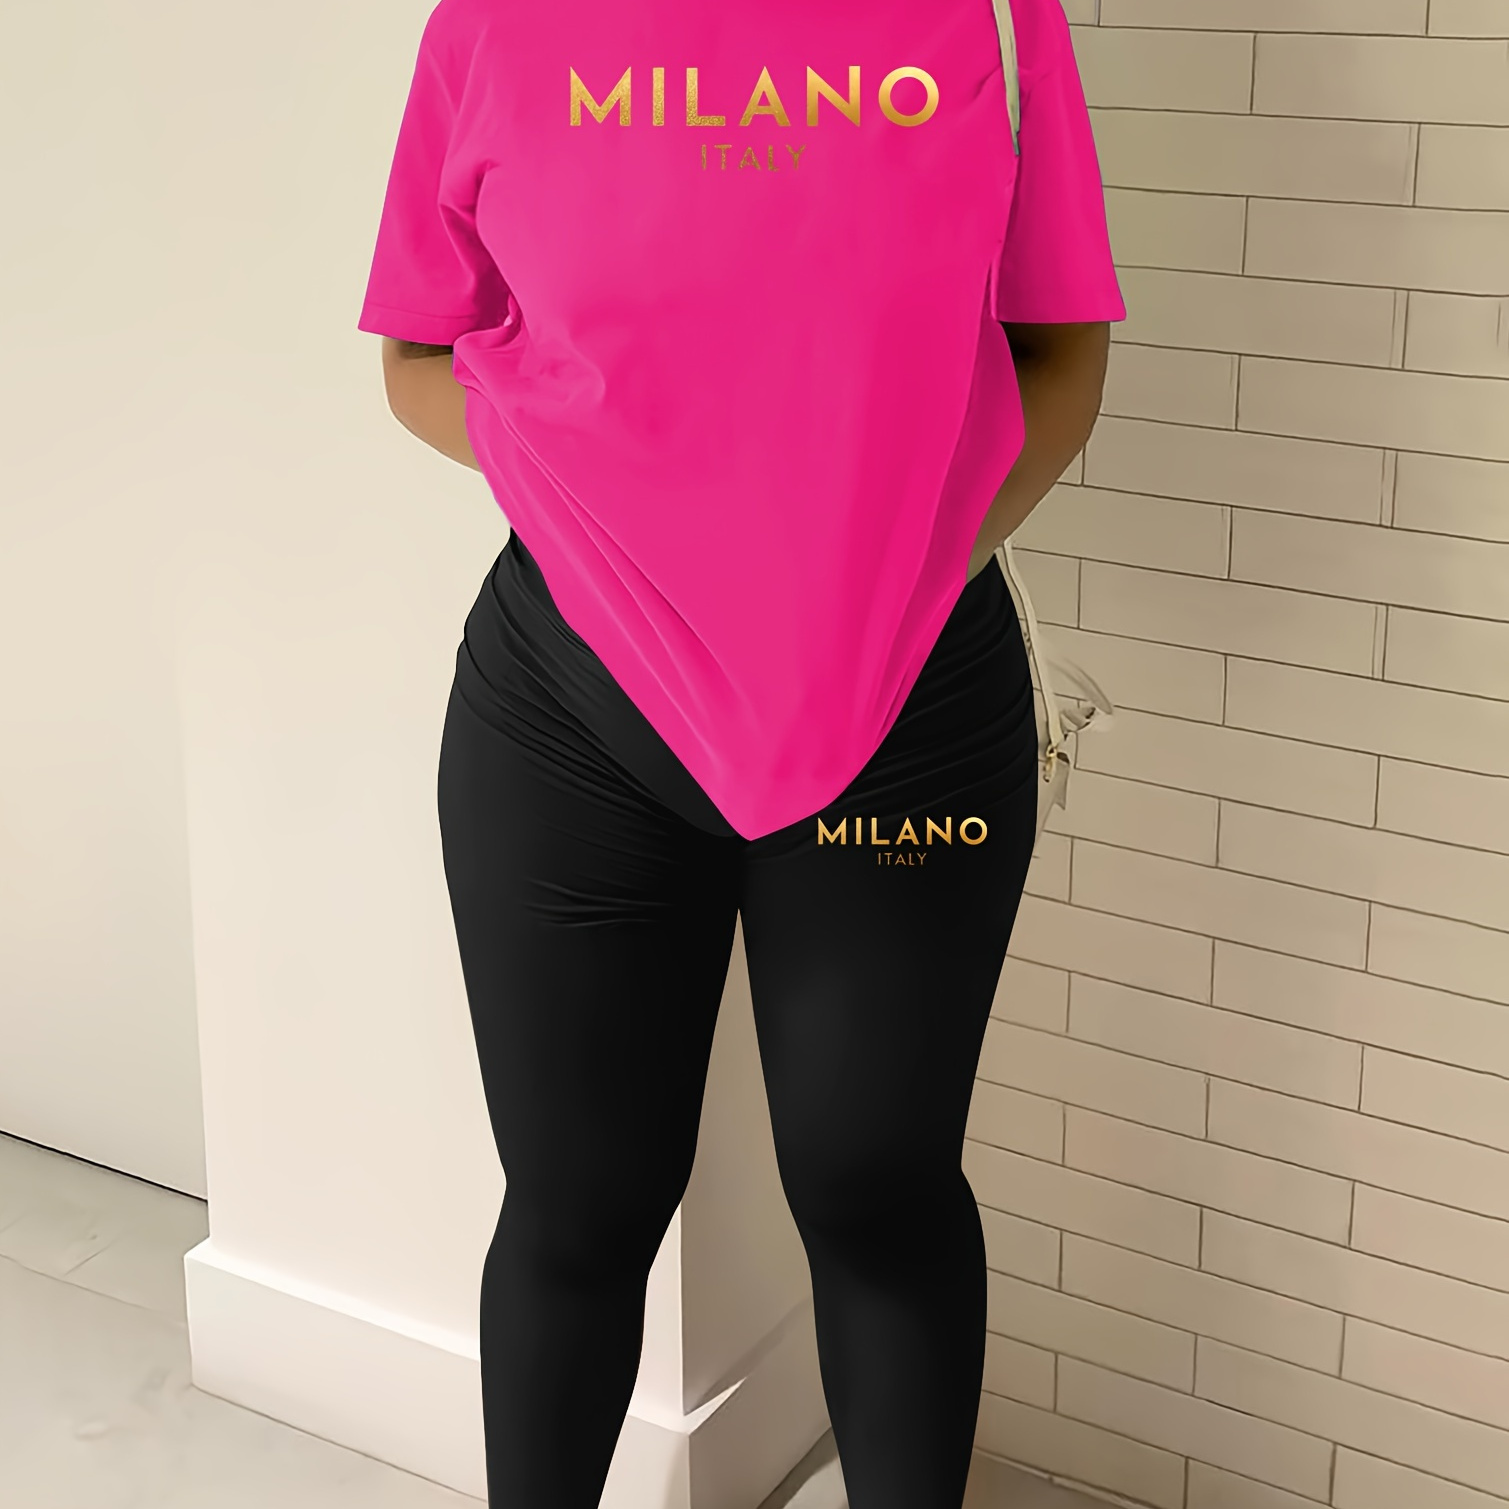 

Milano Print Casual 2 Piece Set, Short Sleeve Crew Neck T-shirt & Leggings Outfits, Women's Clothing